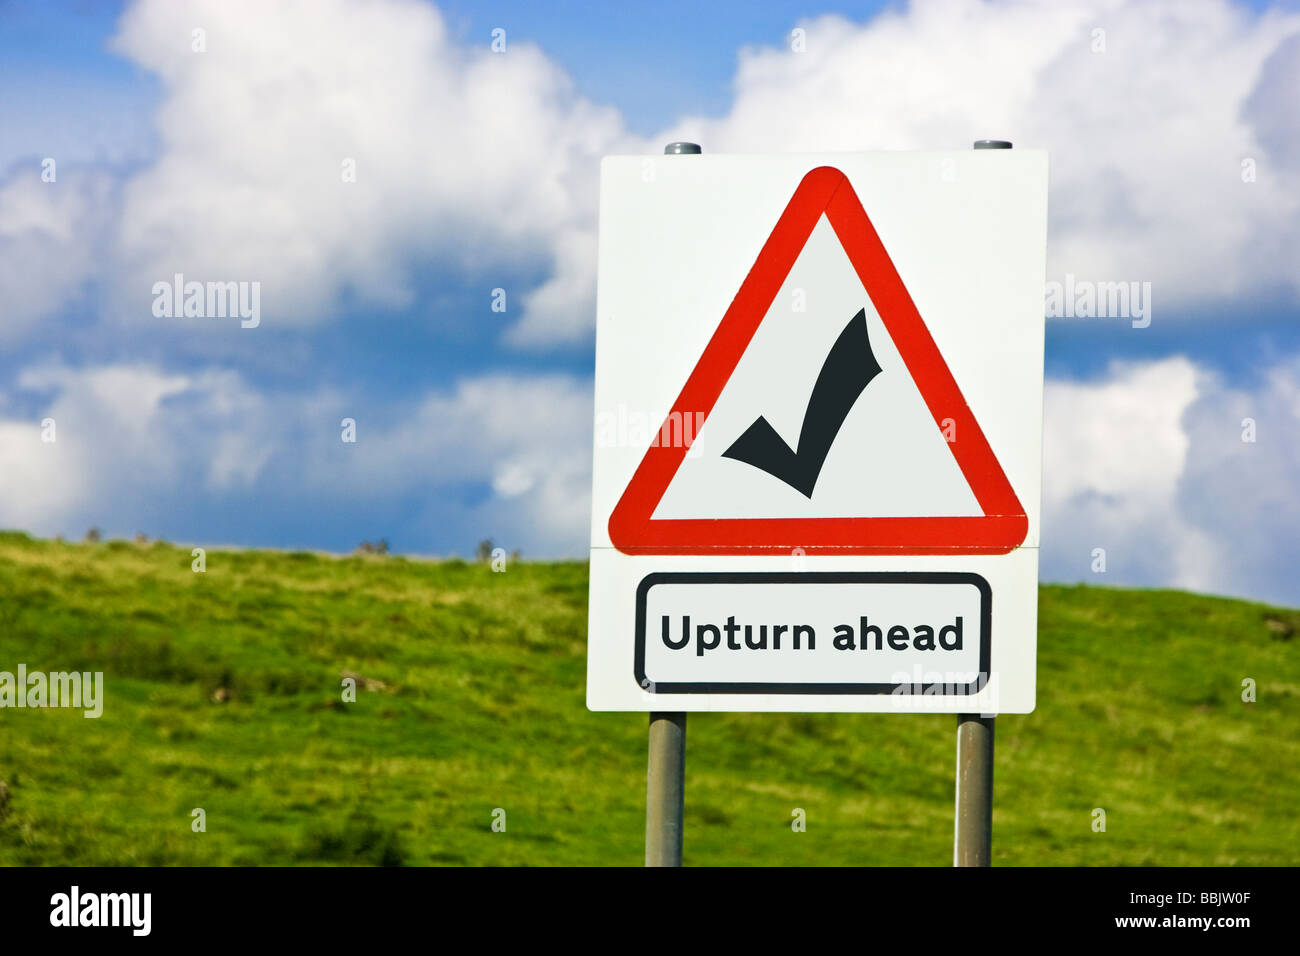 Concept sign for an economic upturn, economic recovery ahead, Britain, UK Stock Photo